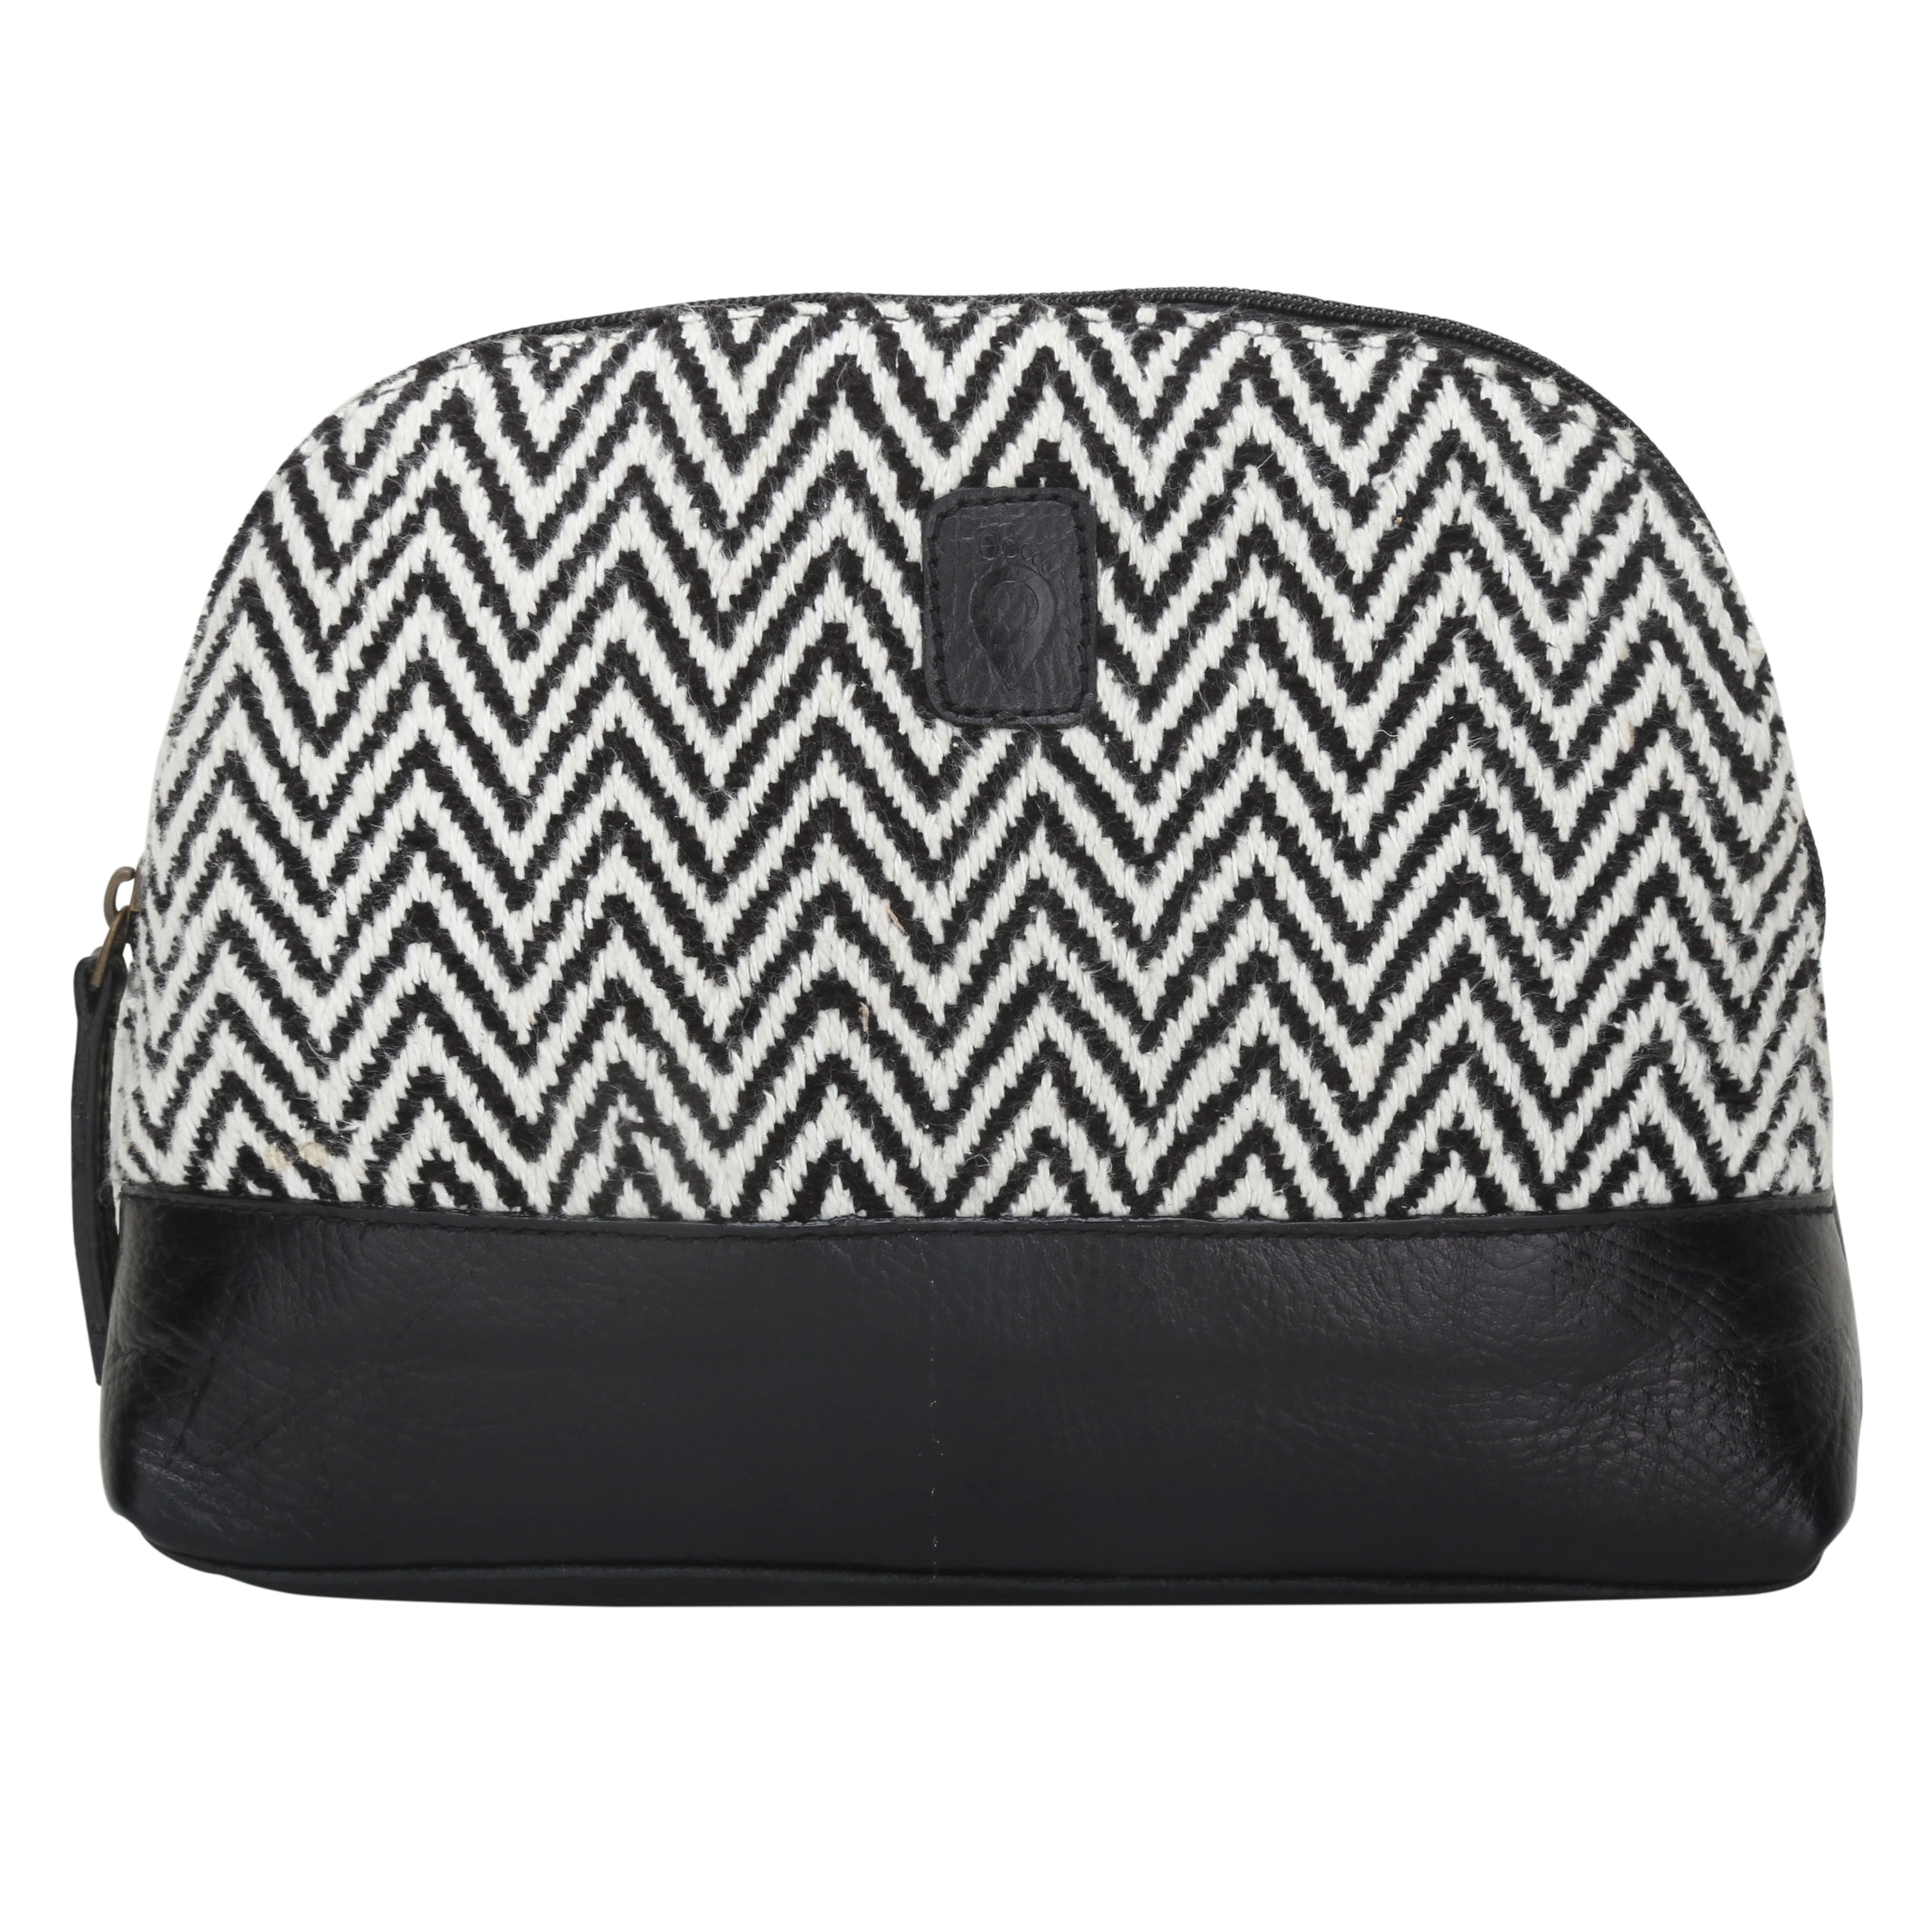 Woven Patterned Clutch | Black and White